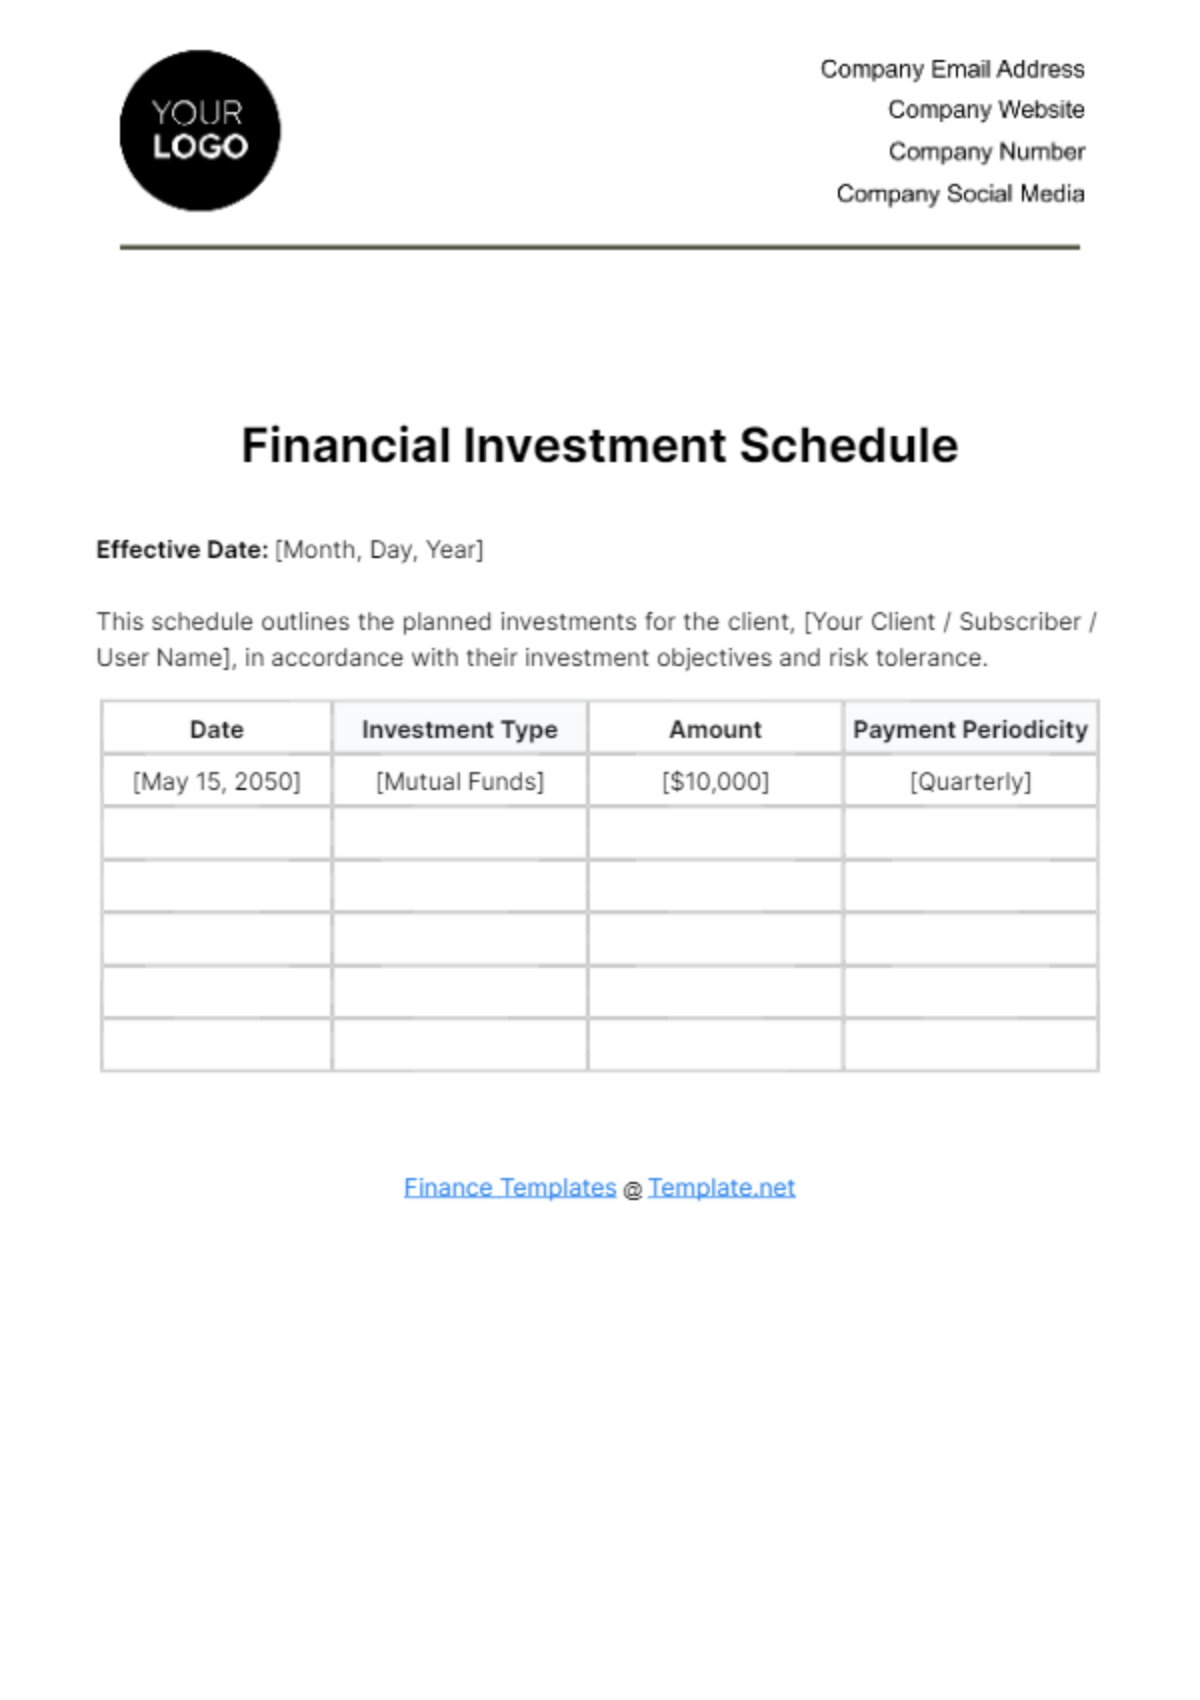 Financial Investment Schedule Template